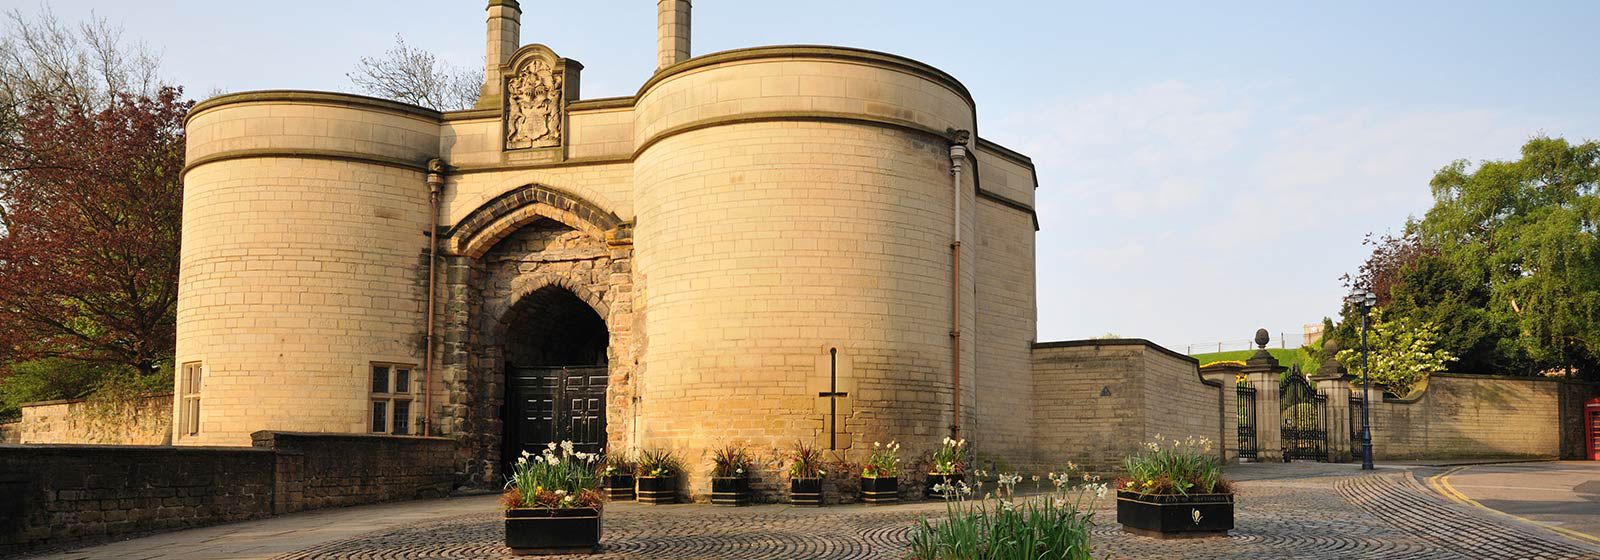 outside view of the front gate of Nottingham castle 